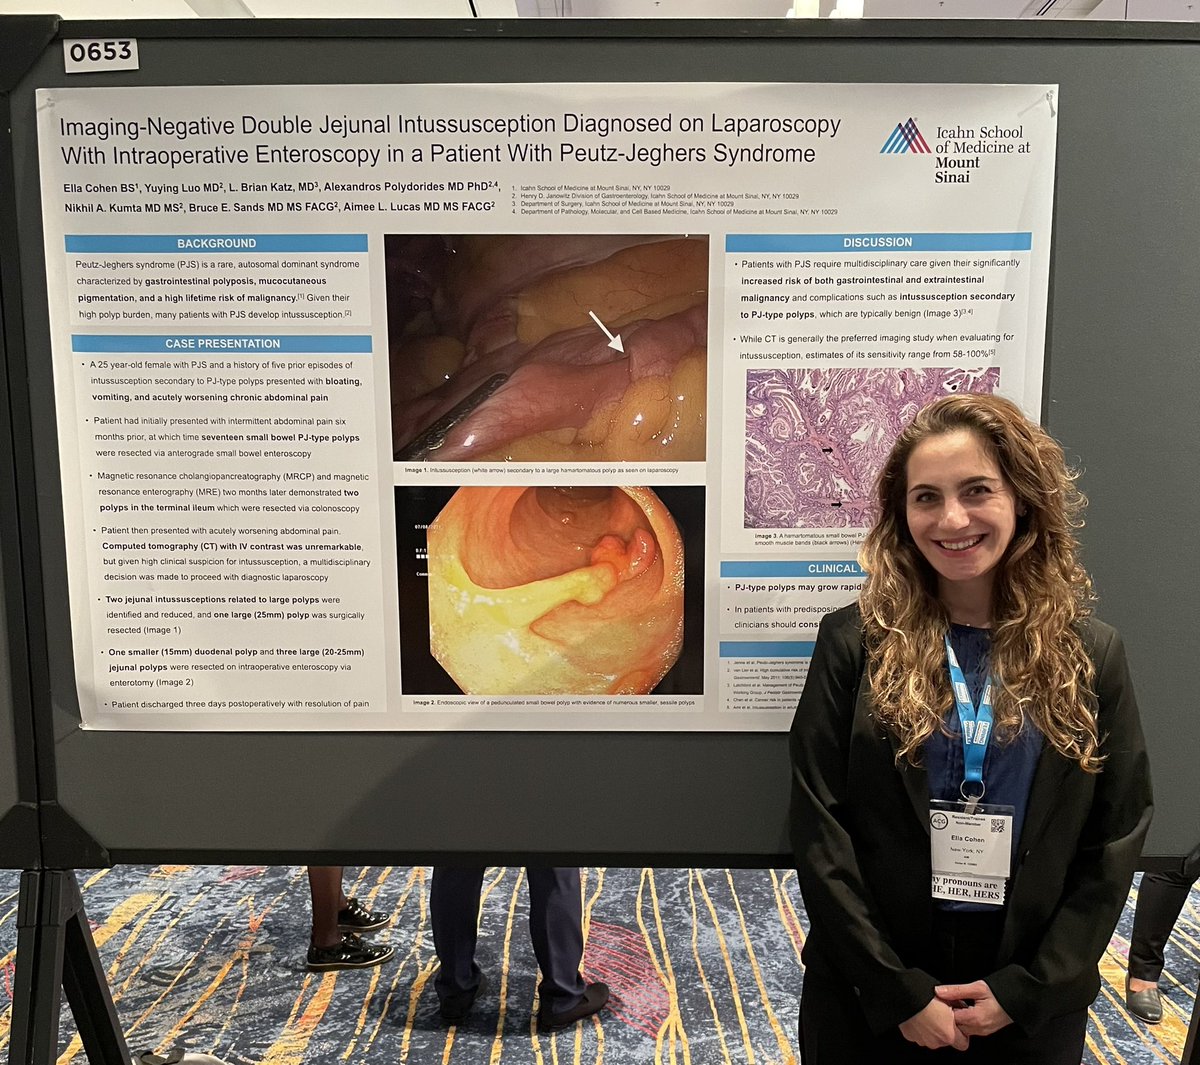 I’m very grateful to have had the opportunity to present this case of a patient with Peutz-Jeghers Syndrome at #ACG2022 (my #firstACG)! cdmcd.co/G3aLAk